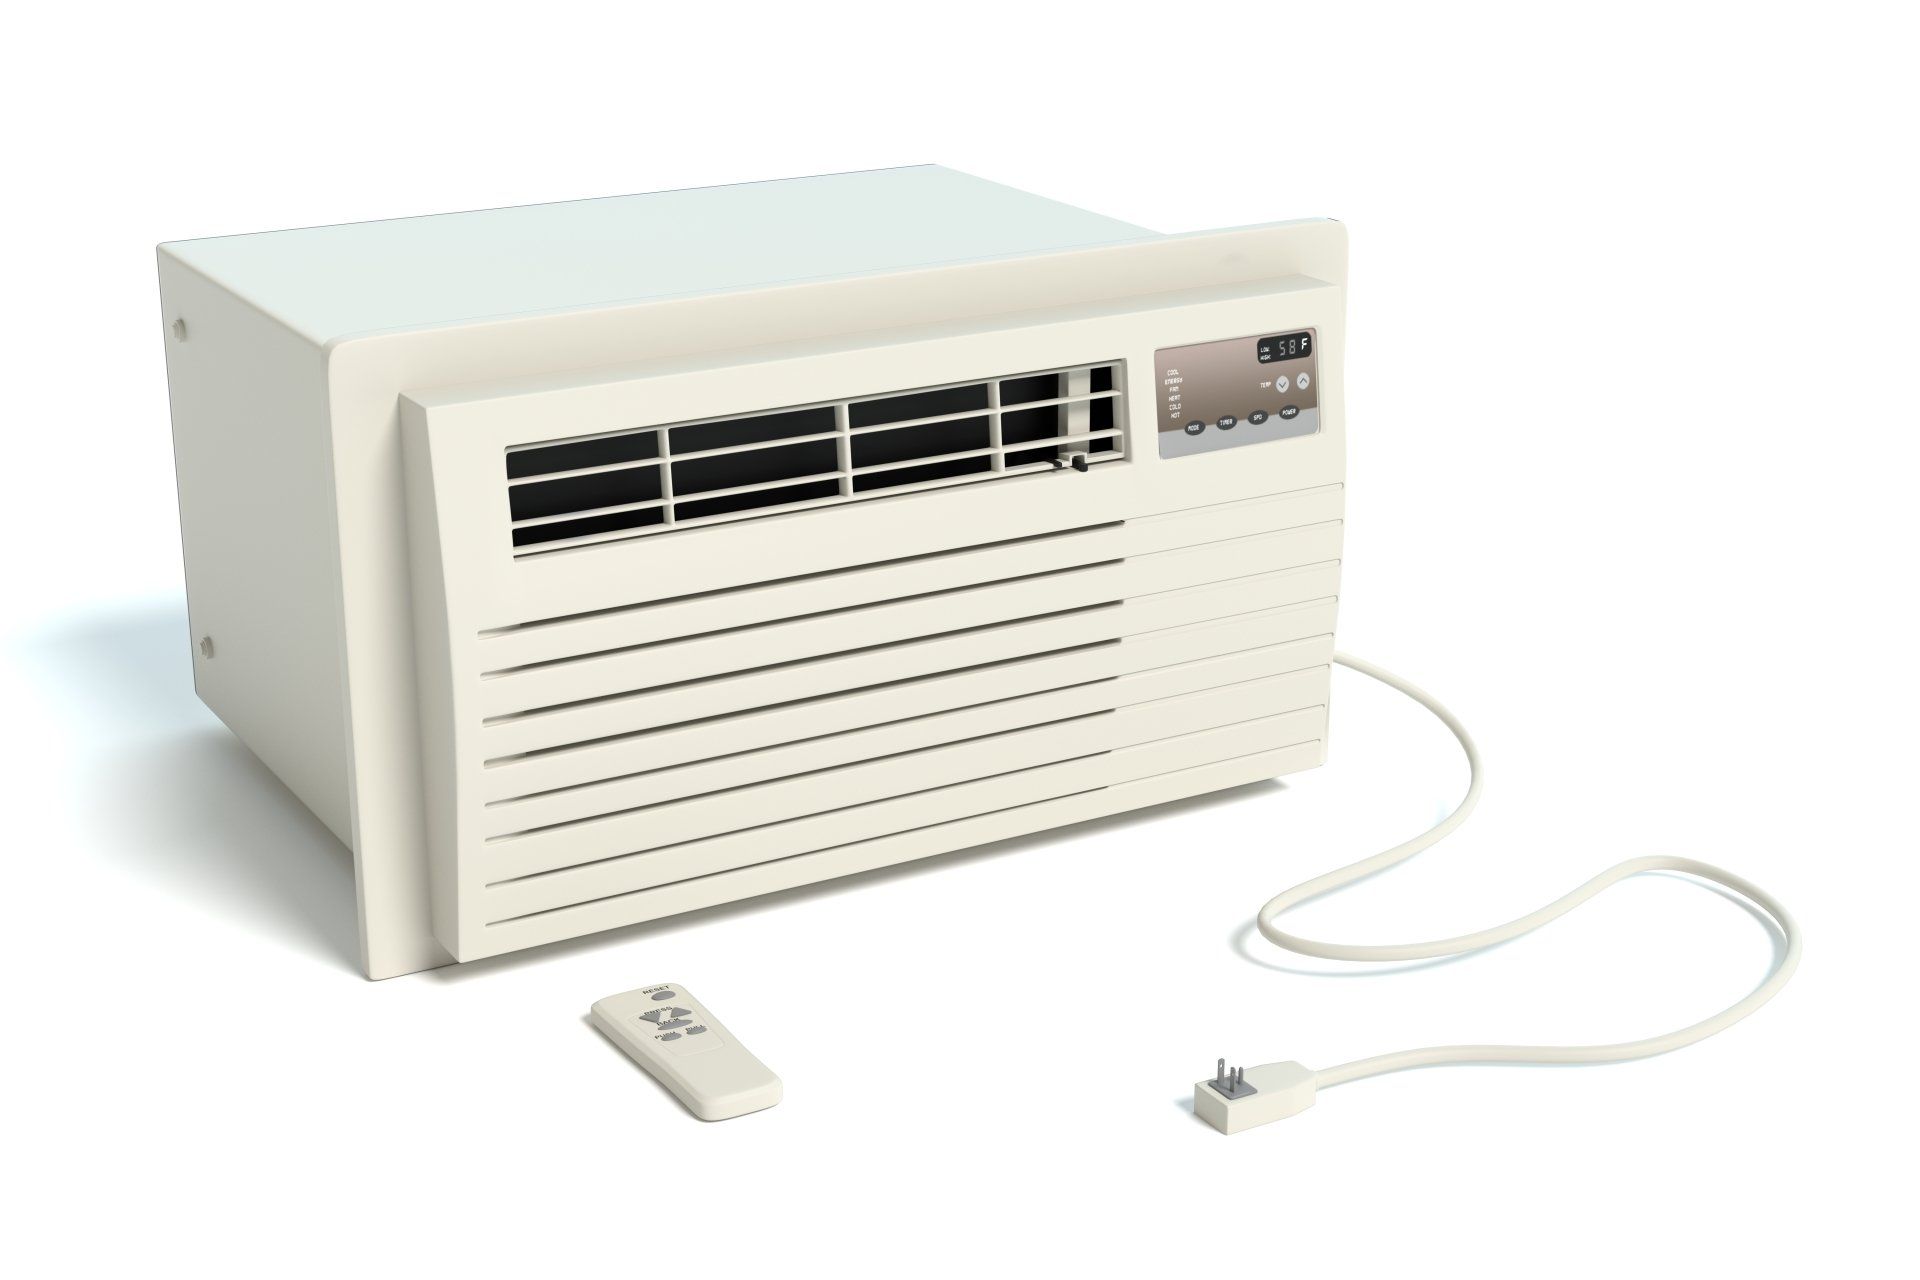 Small Wall Mounted Air Conditioner Rentals. Rent a Small Wall Mounted Air Conditioner. Apply